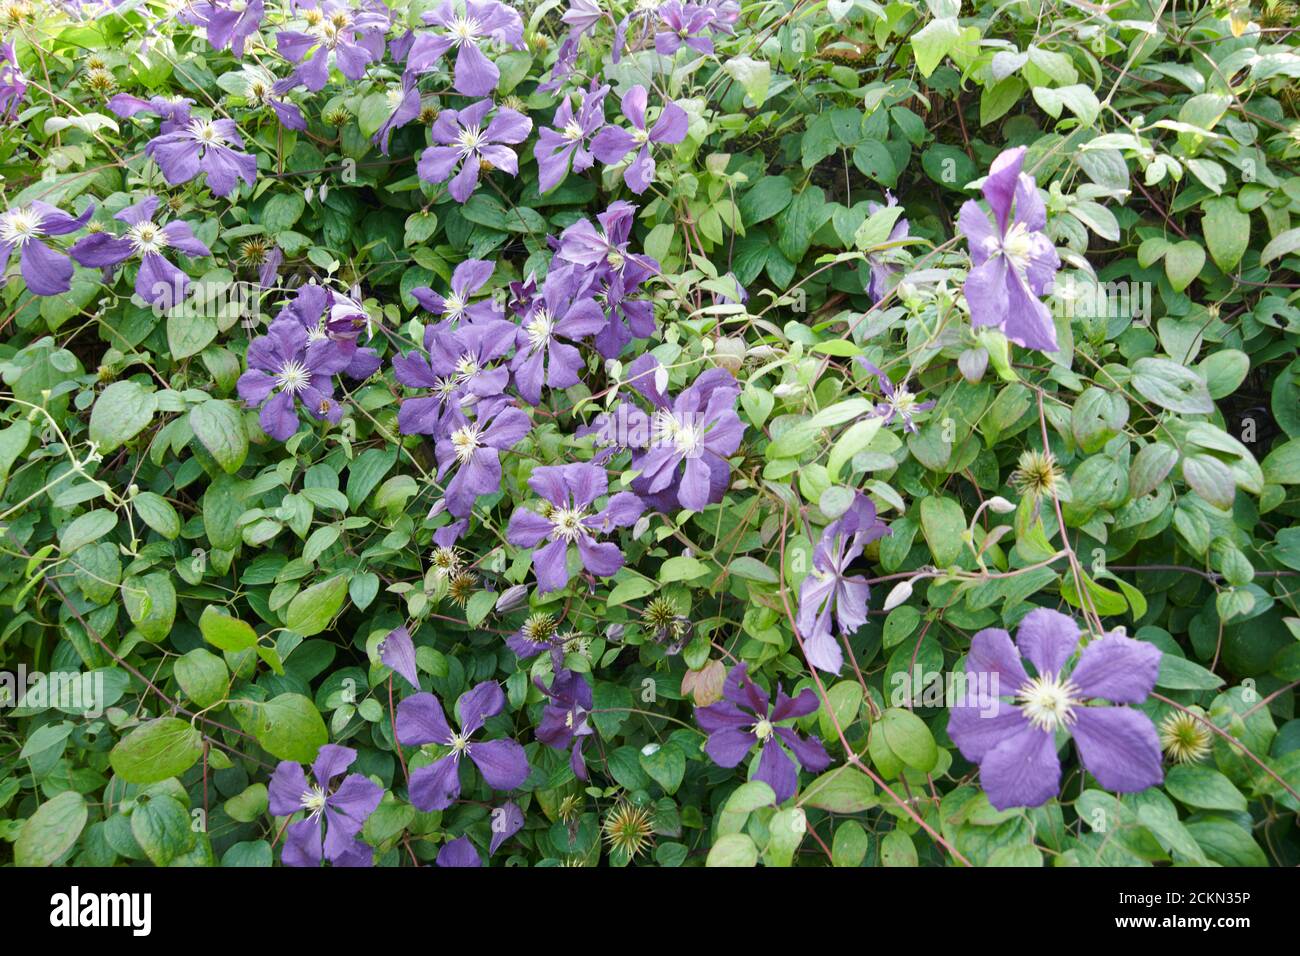 Clematis viticella is Also known as Italian Leather flower, in full bloom against a sheltered garden wall, England, UK, GB. Stock Photo